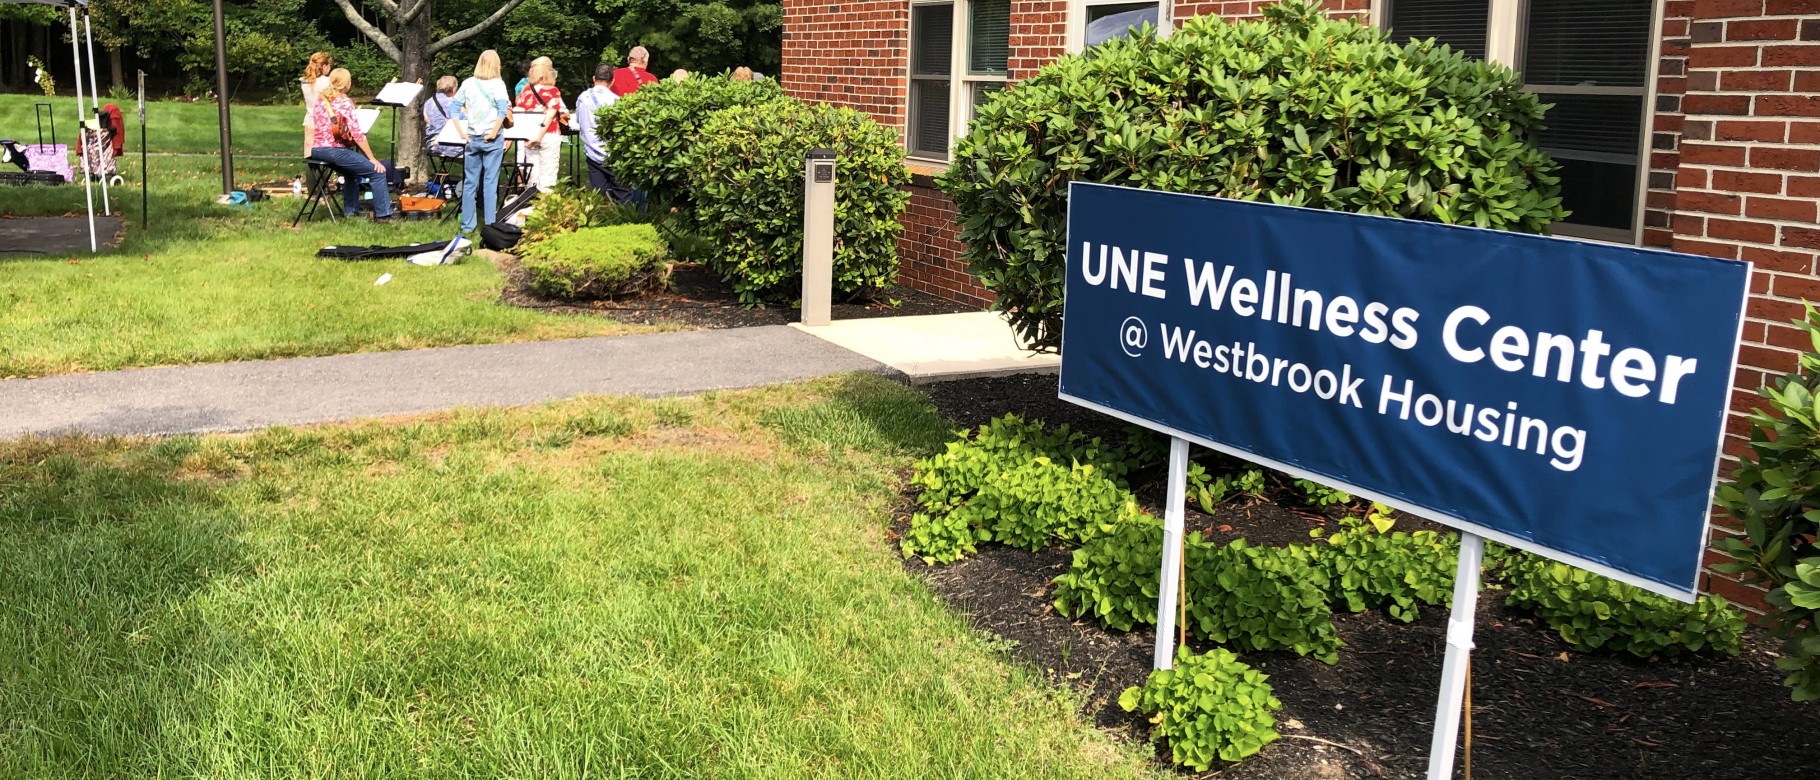 Image of Wellness Center sign at a Westbrook Housing property